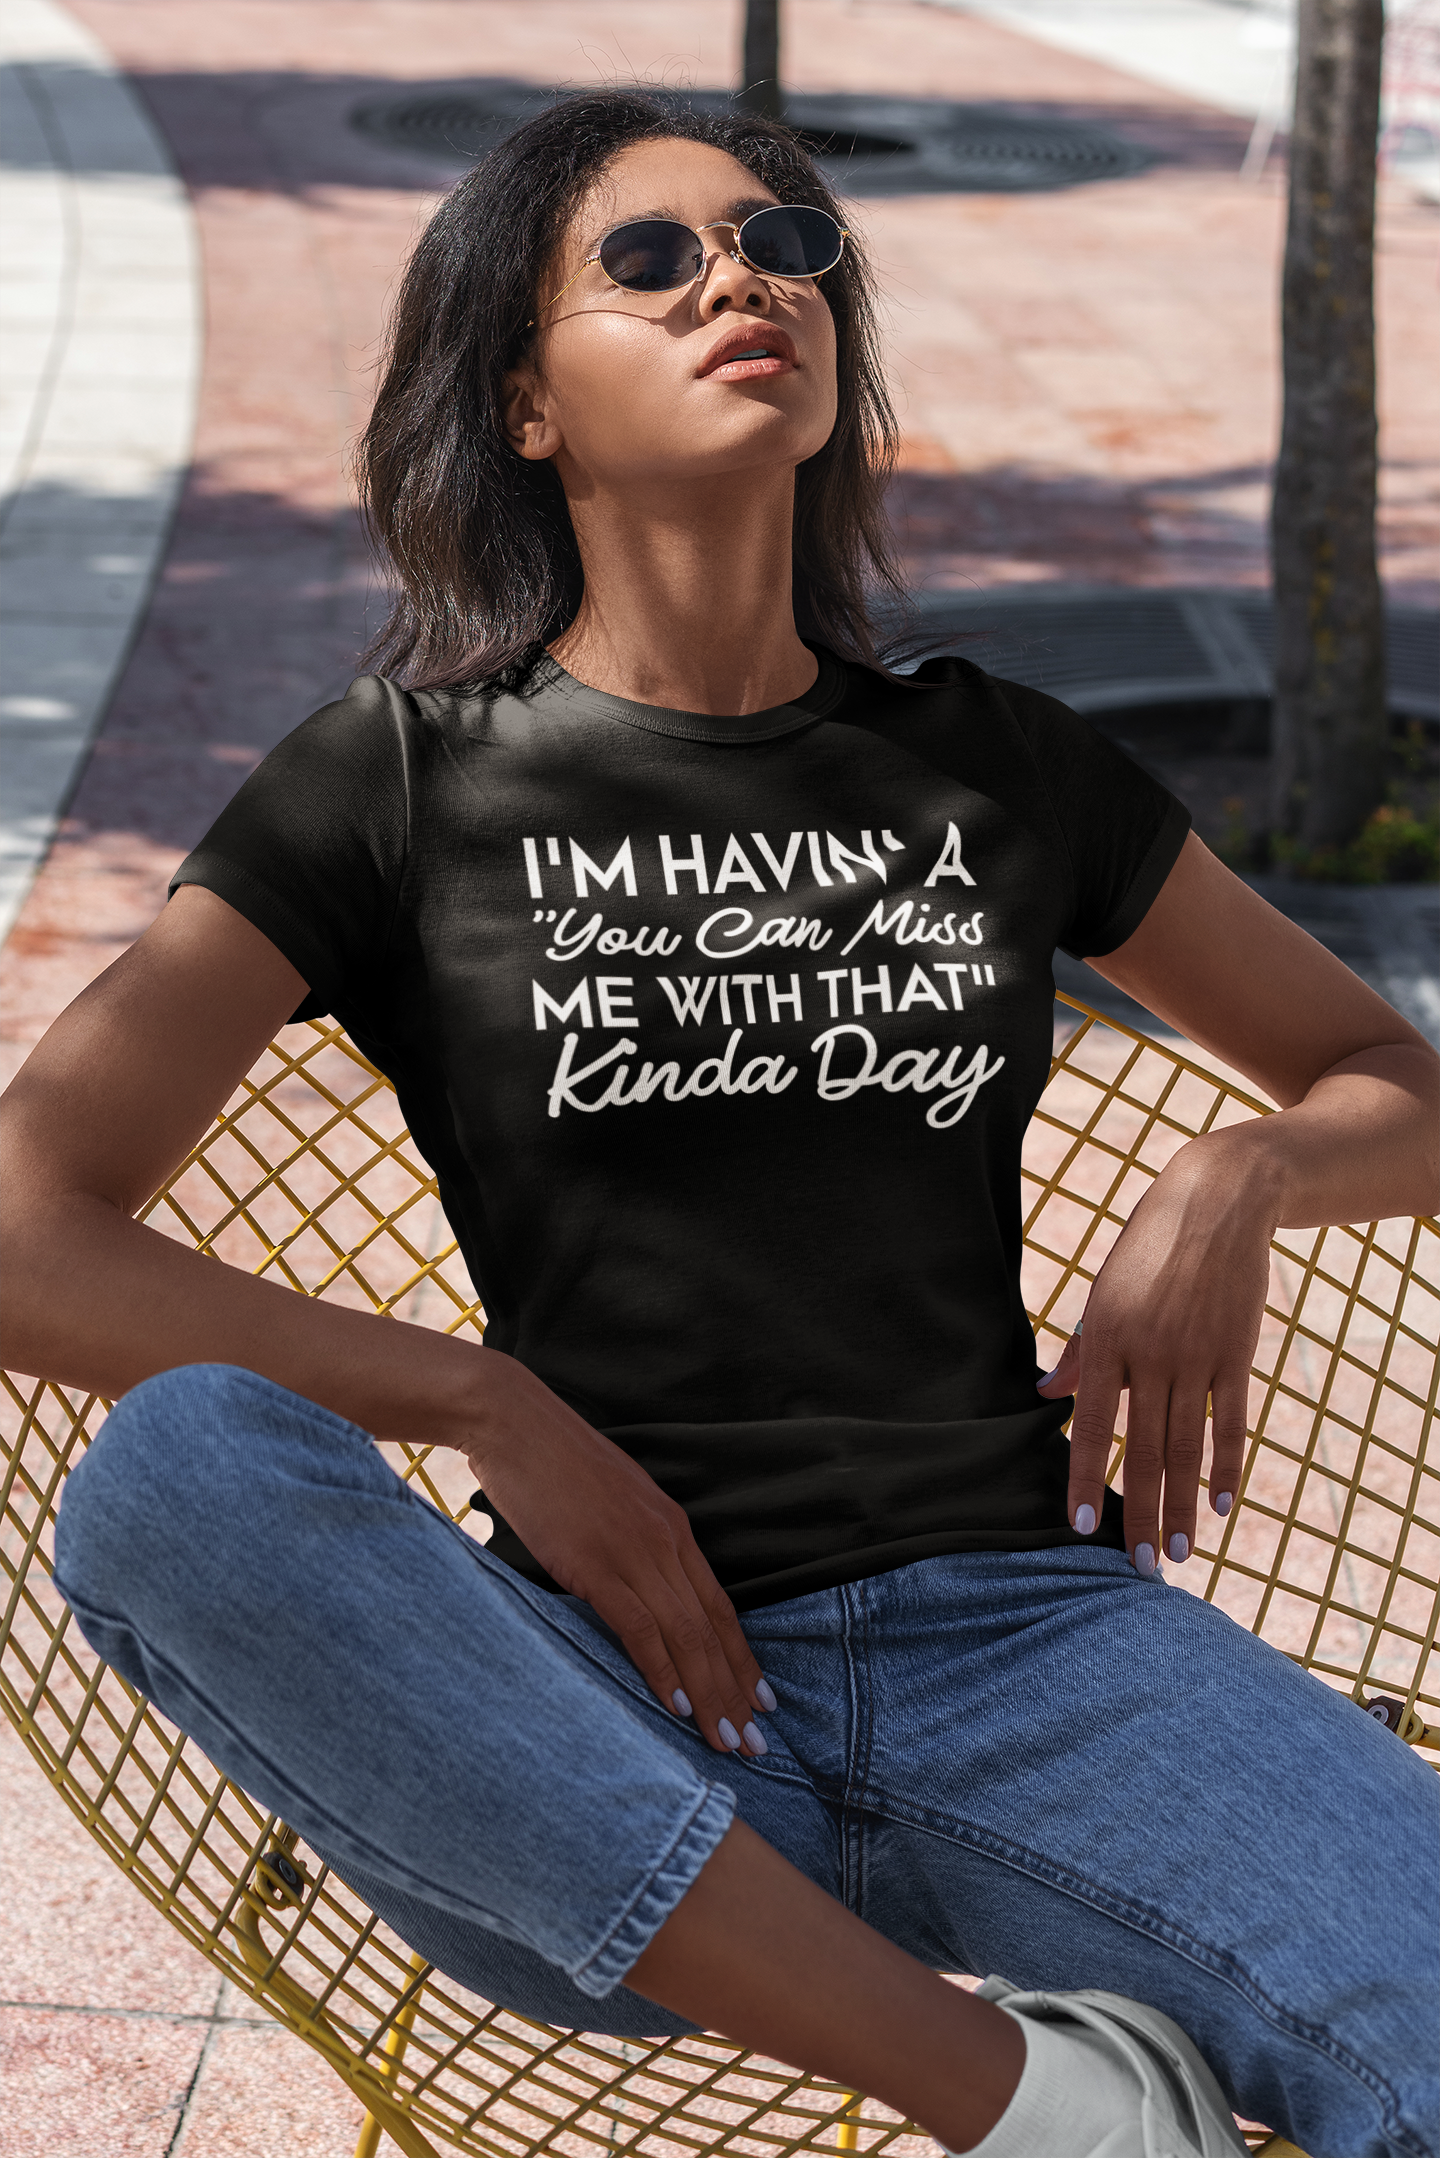 I'm having a Sharp Tact Kreativ | Tees & Gifts with Encouraging Messages to Brighten Your Day with a Bit of Wit - women's short sleeve t-shirt.